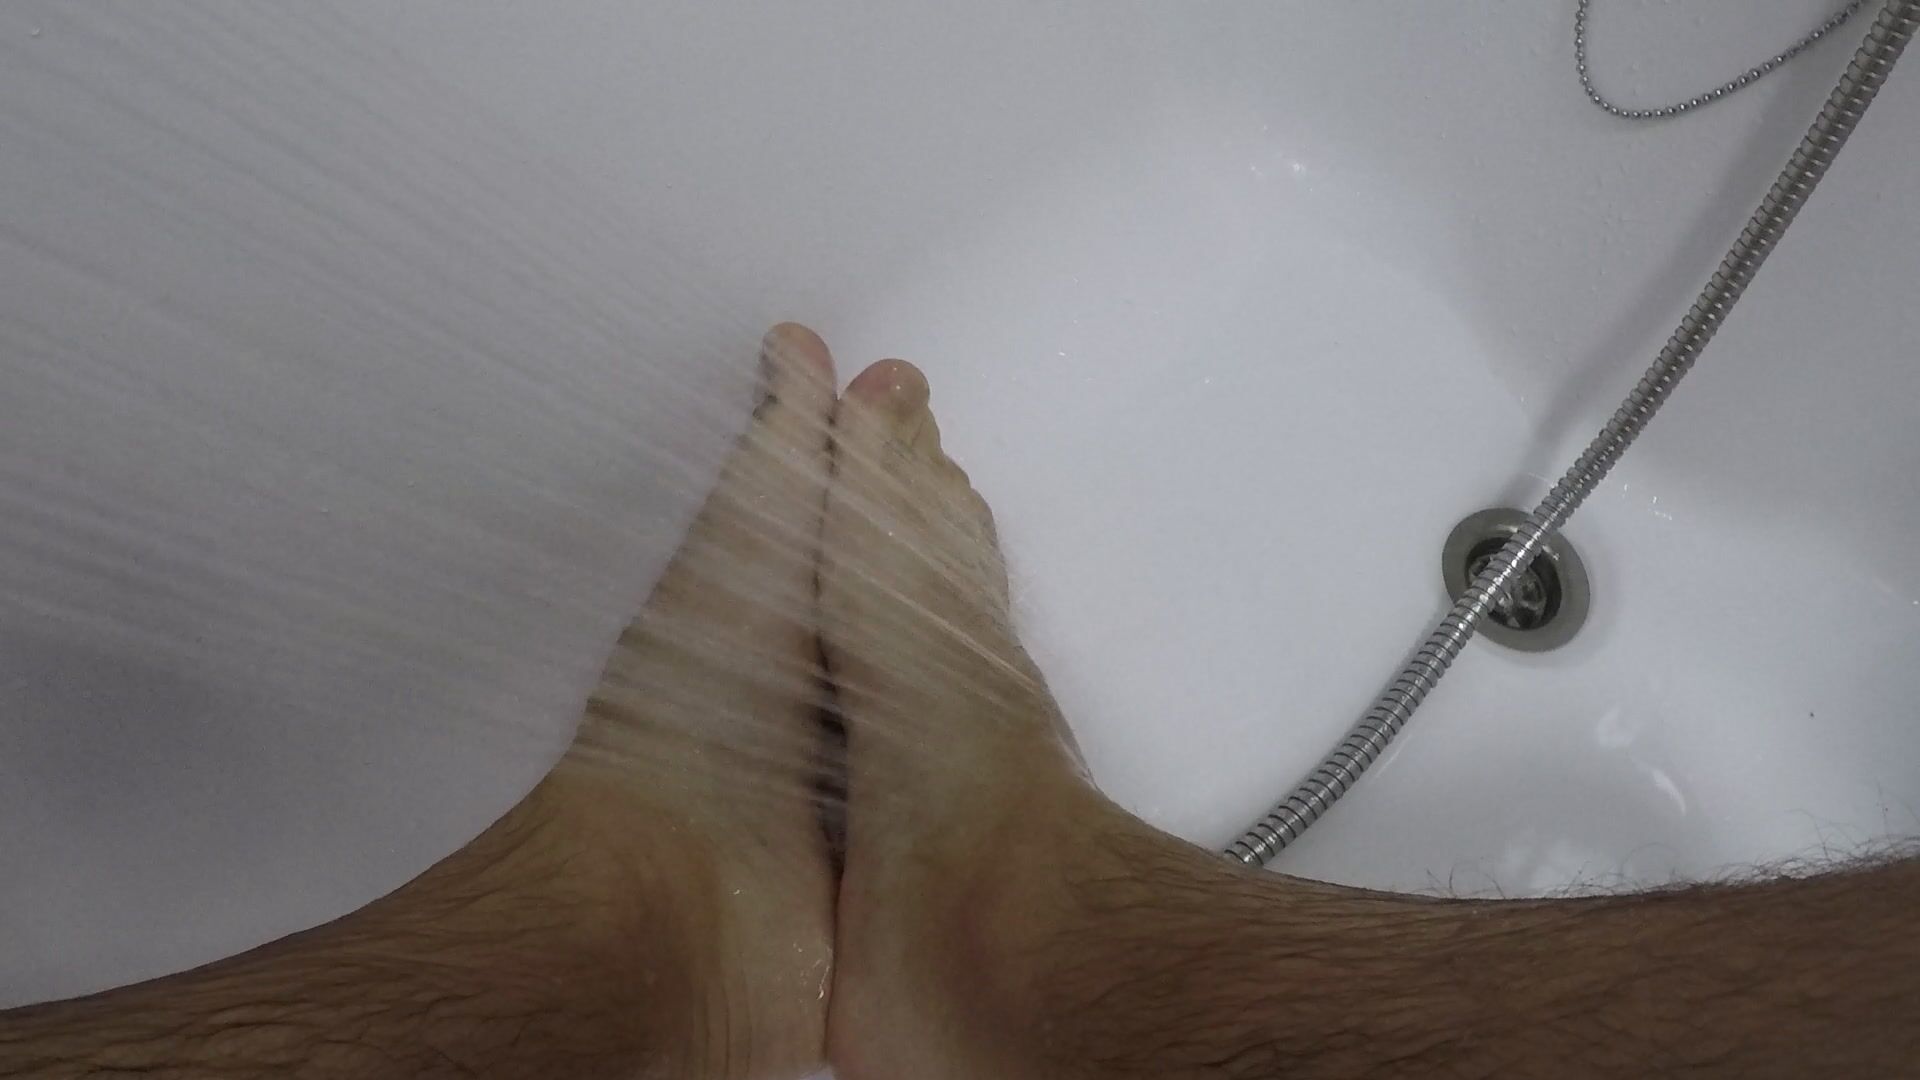 Time to wash those feet